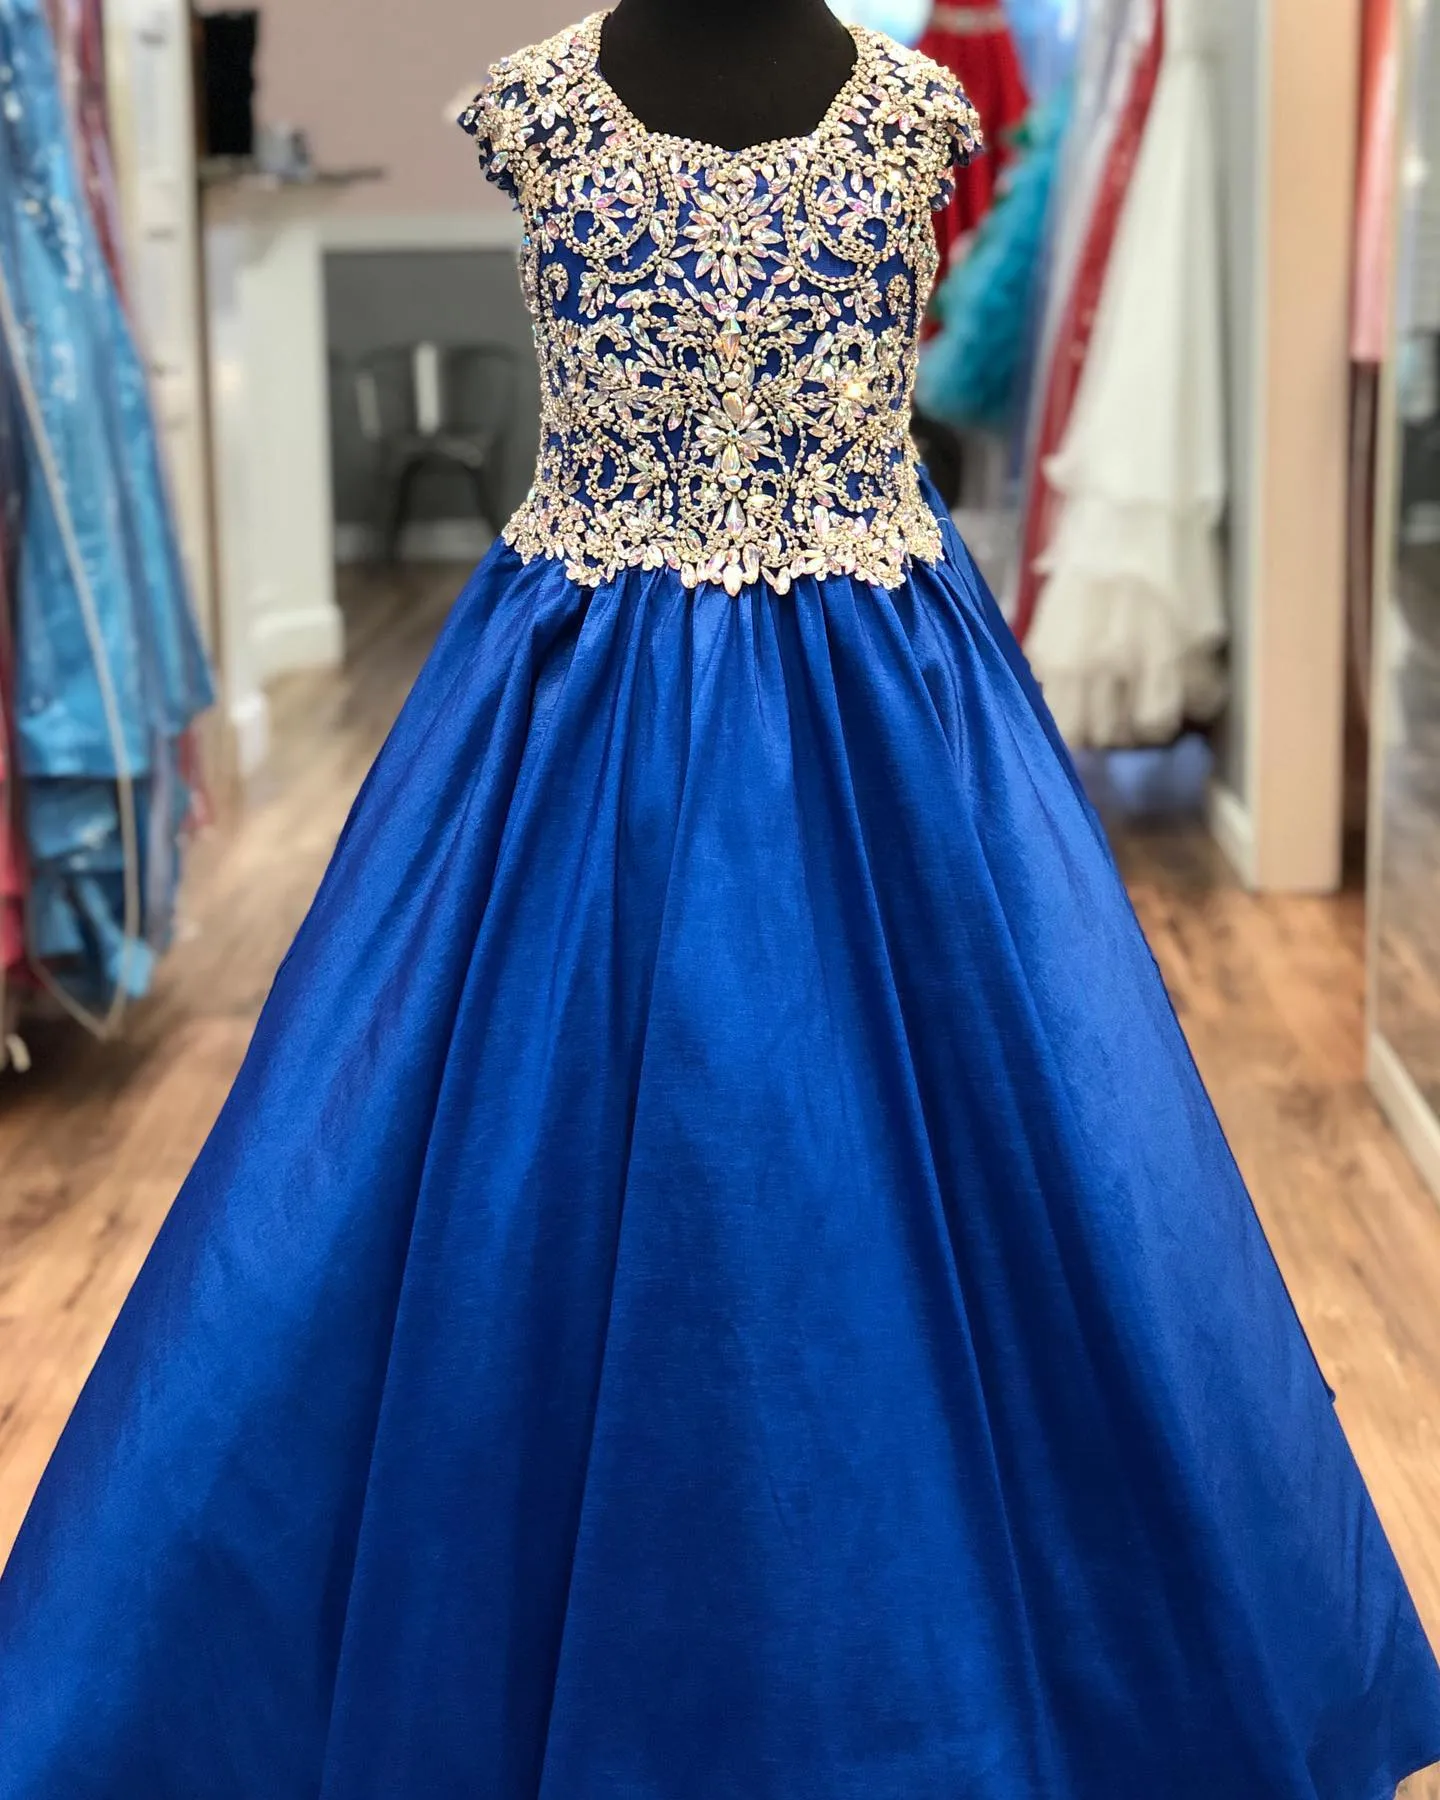 Royal blue short sleeves or cap sleeves sparkle beaded ball gown  wedding/prom dress with glitter tulle